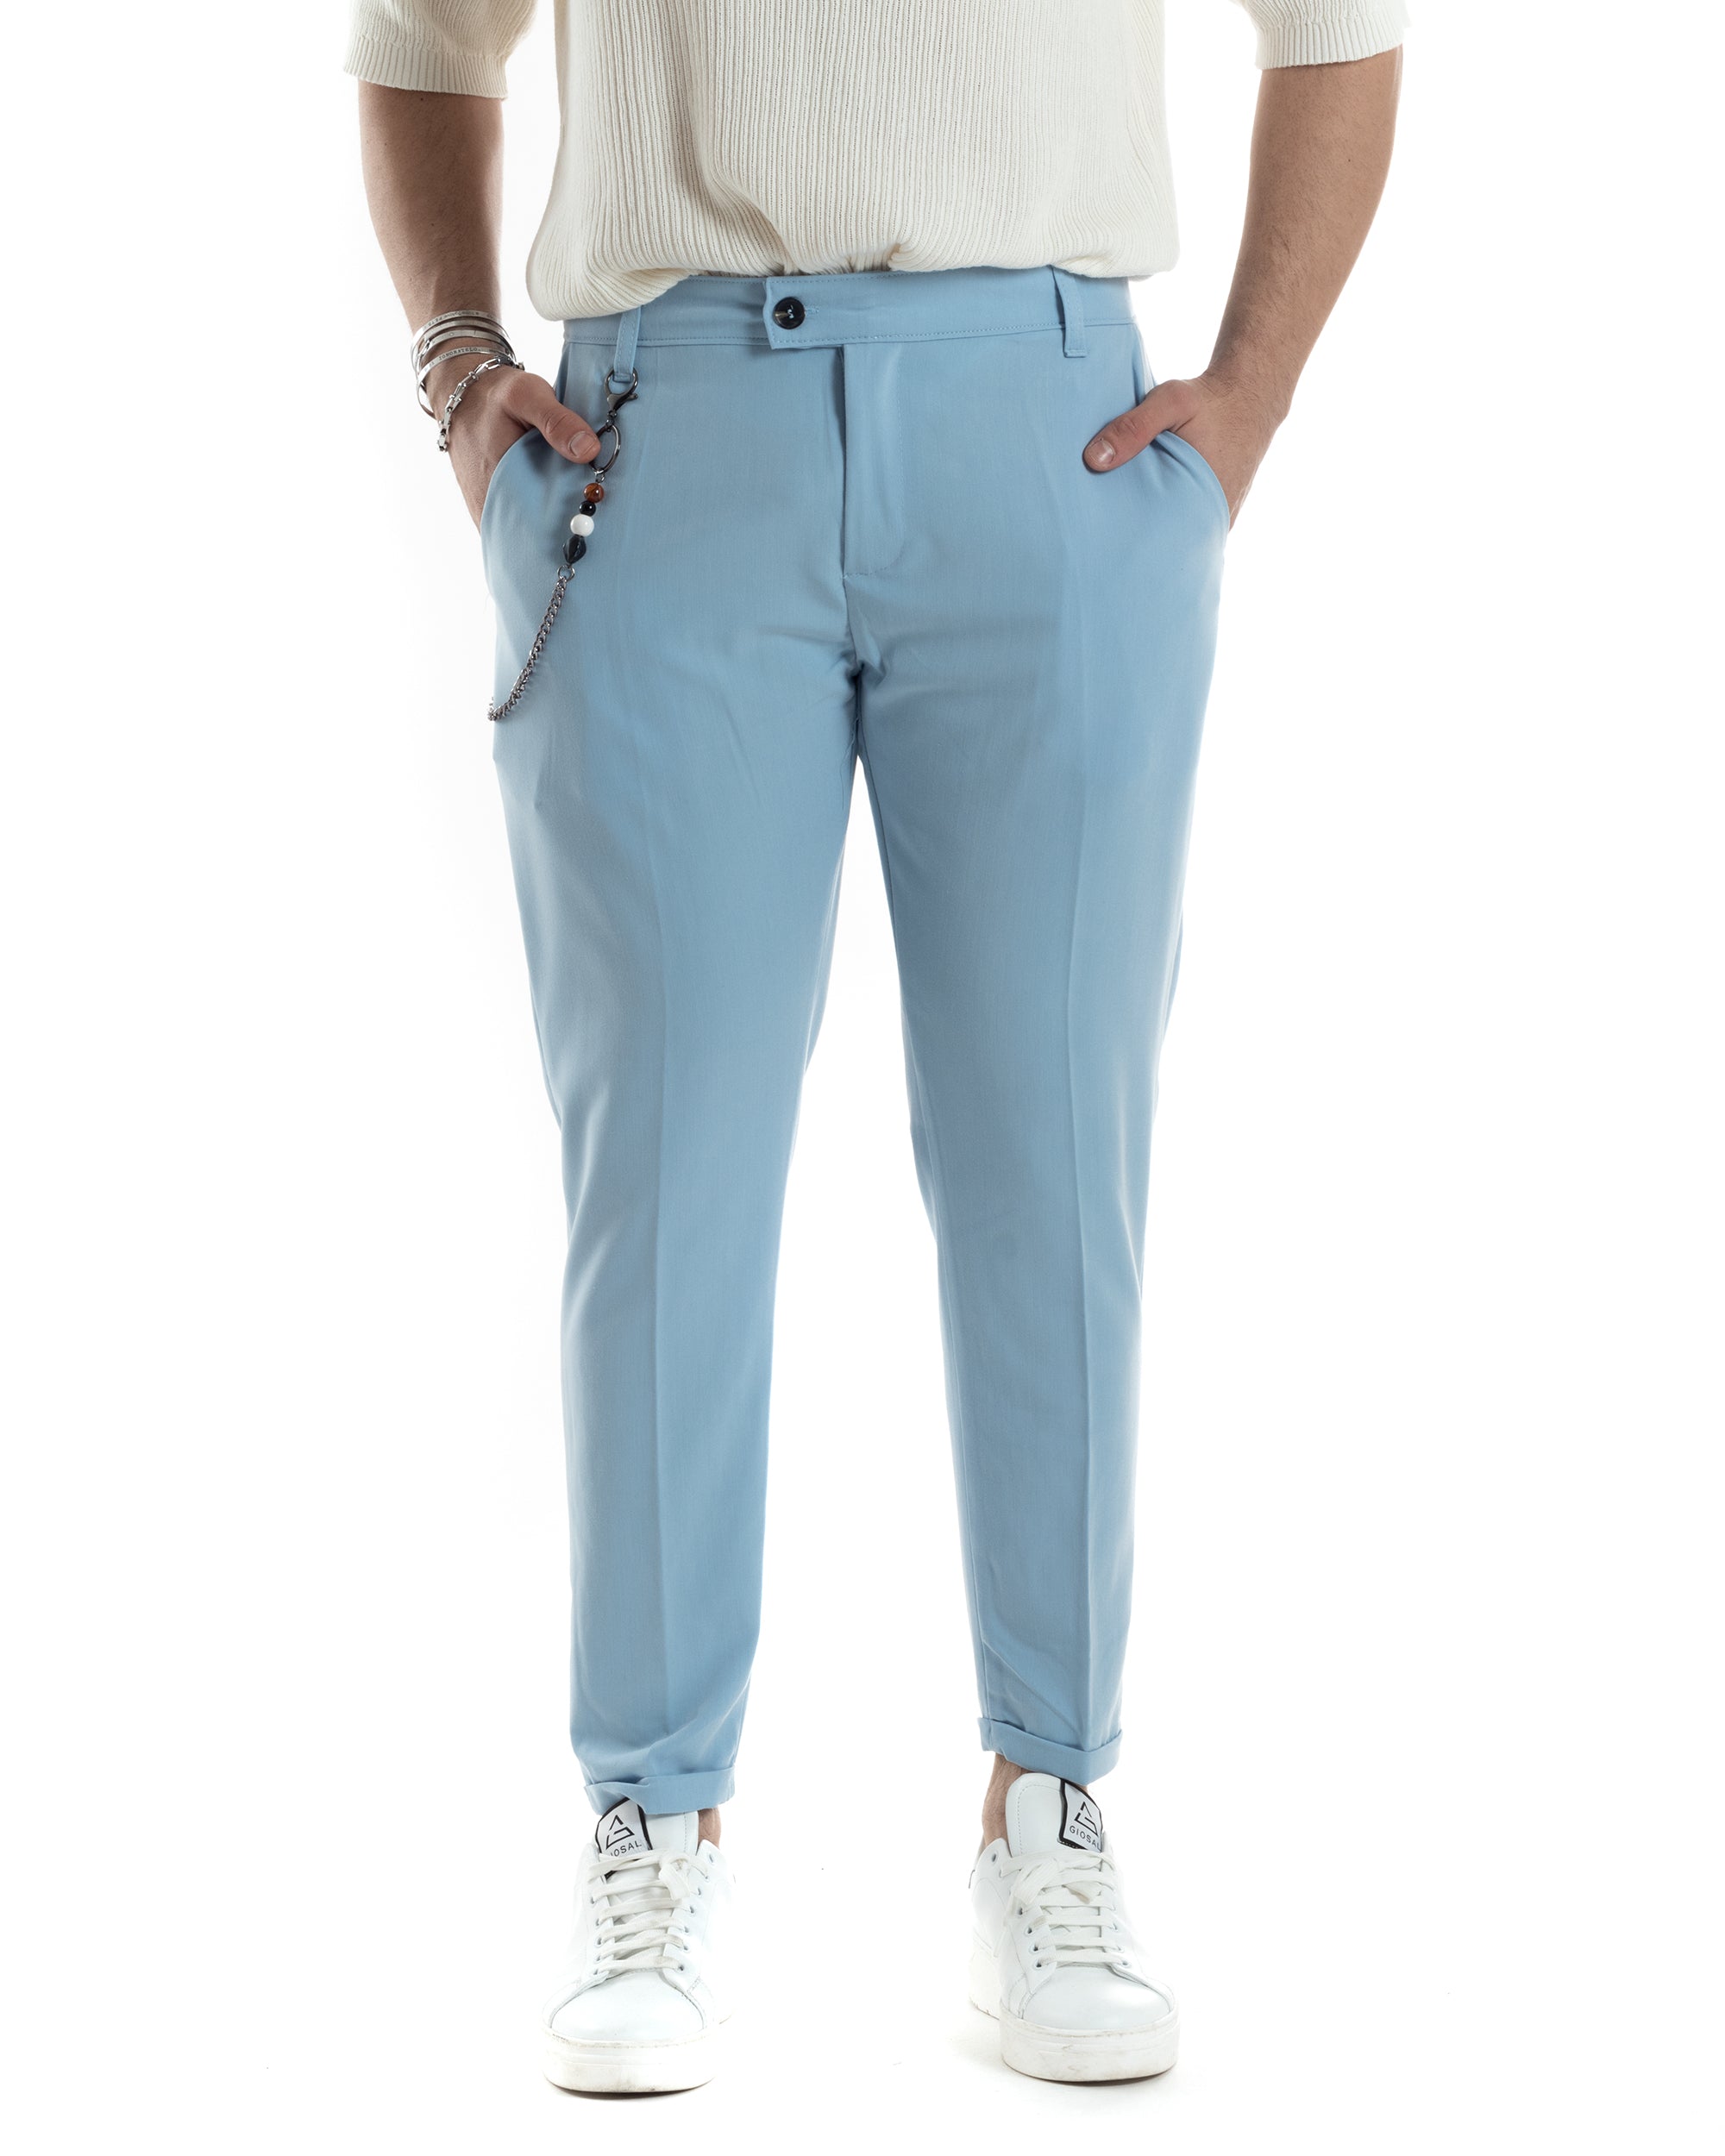 Classic Men's Trousers Elongated Button Viscose Casual Solid Color White GIOSAL-P5659A